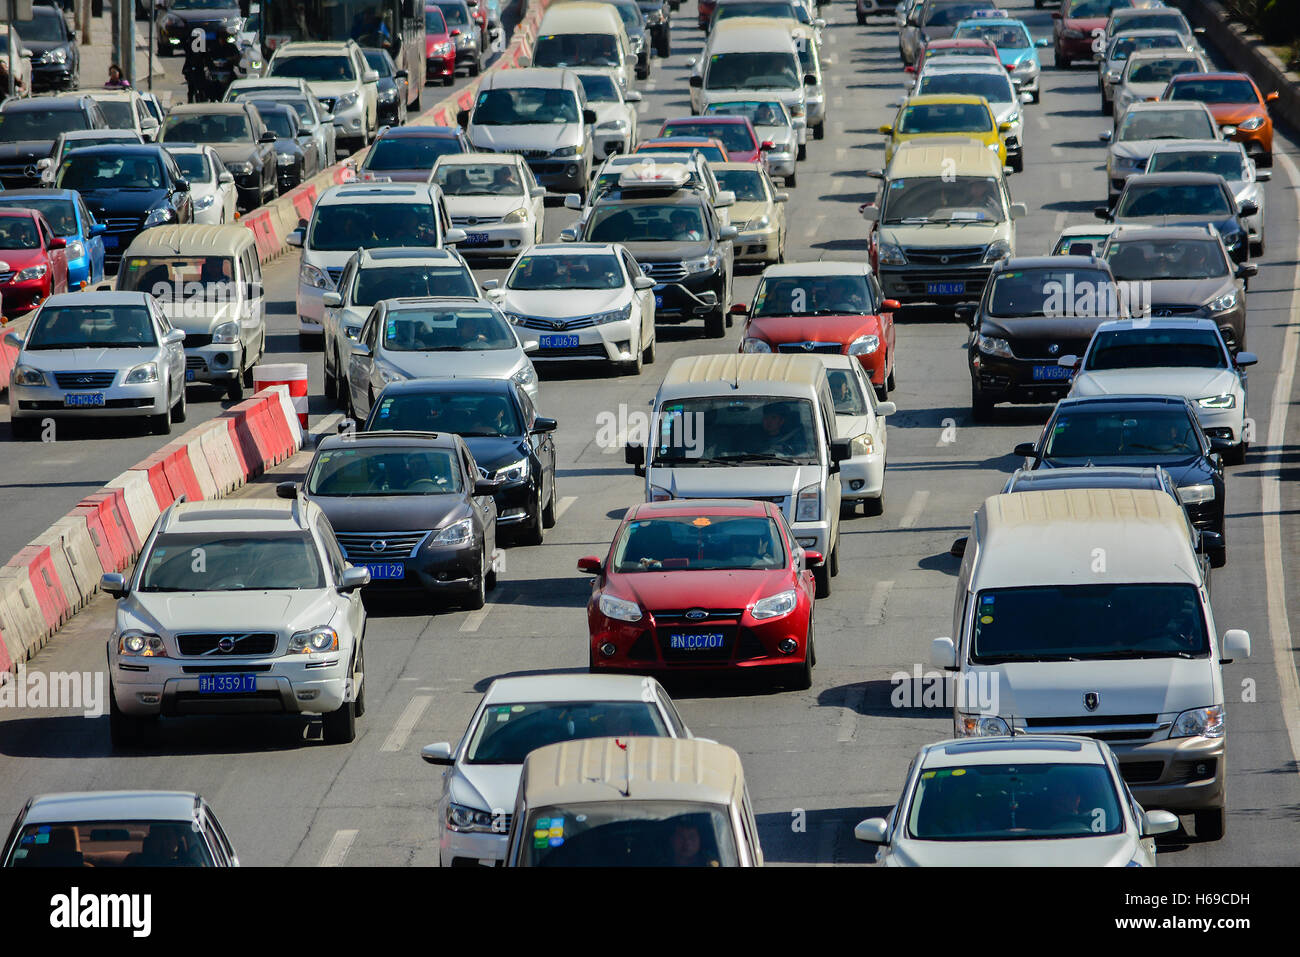 Tianjin,China - March 26,2016 : City traffic, traffic jams, a stream of cars in rush hour in Tianjin city China. Stock Photo